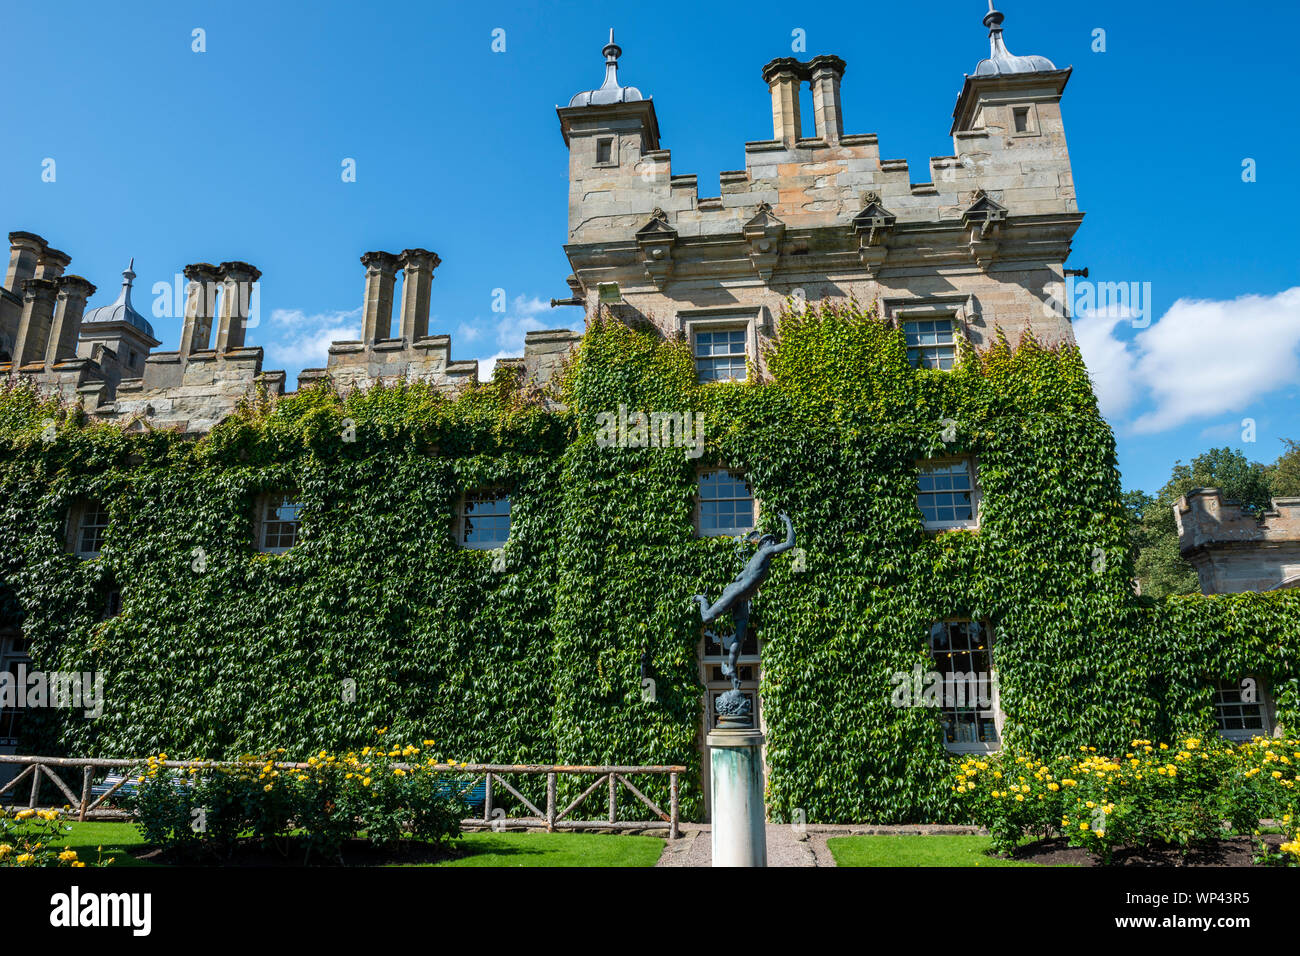 Ivy covered courtyard with Statue of Hermes at Floors Castle near Kelso, Scottish Borders, Scotland, UK Stock Photo